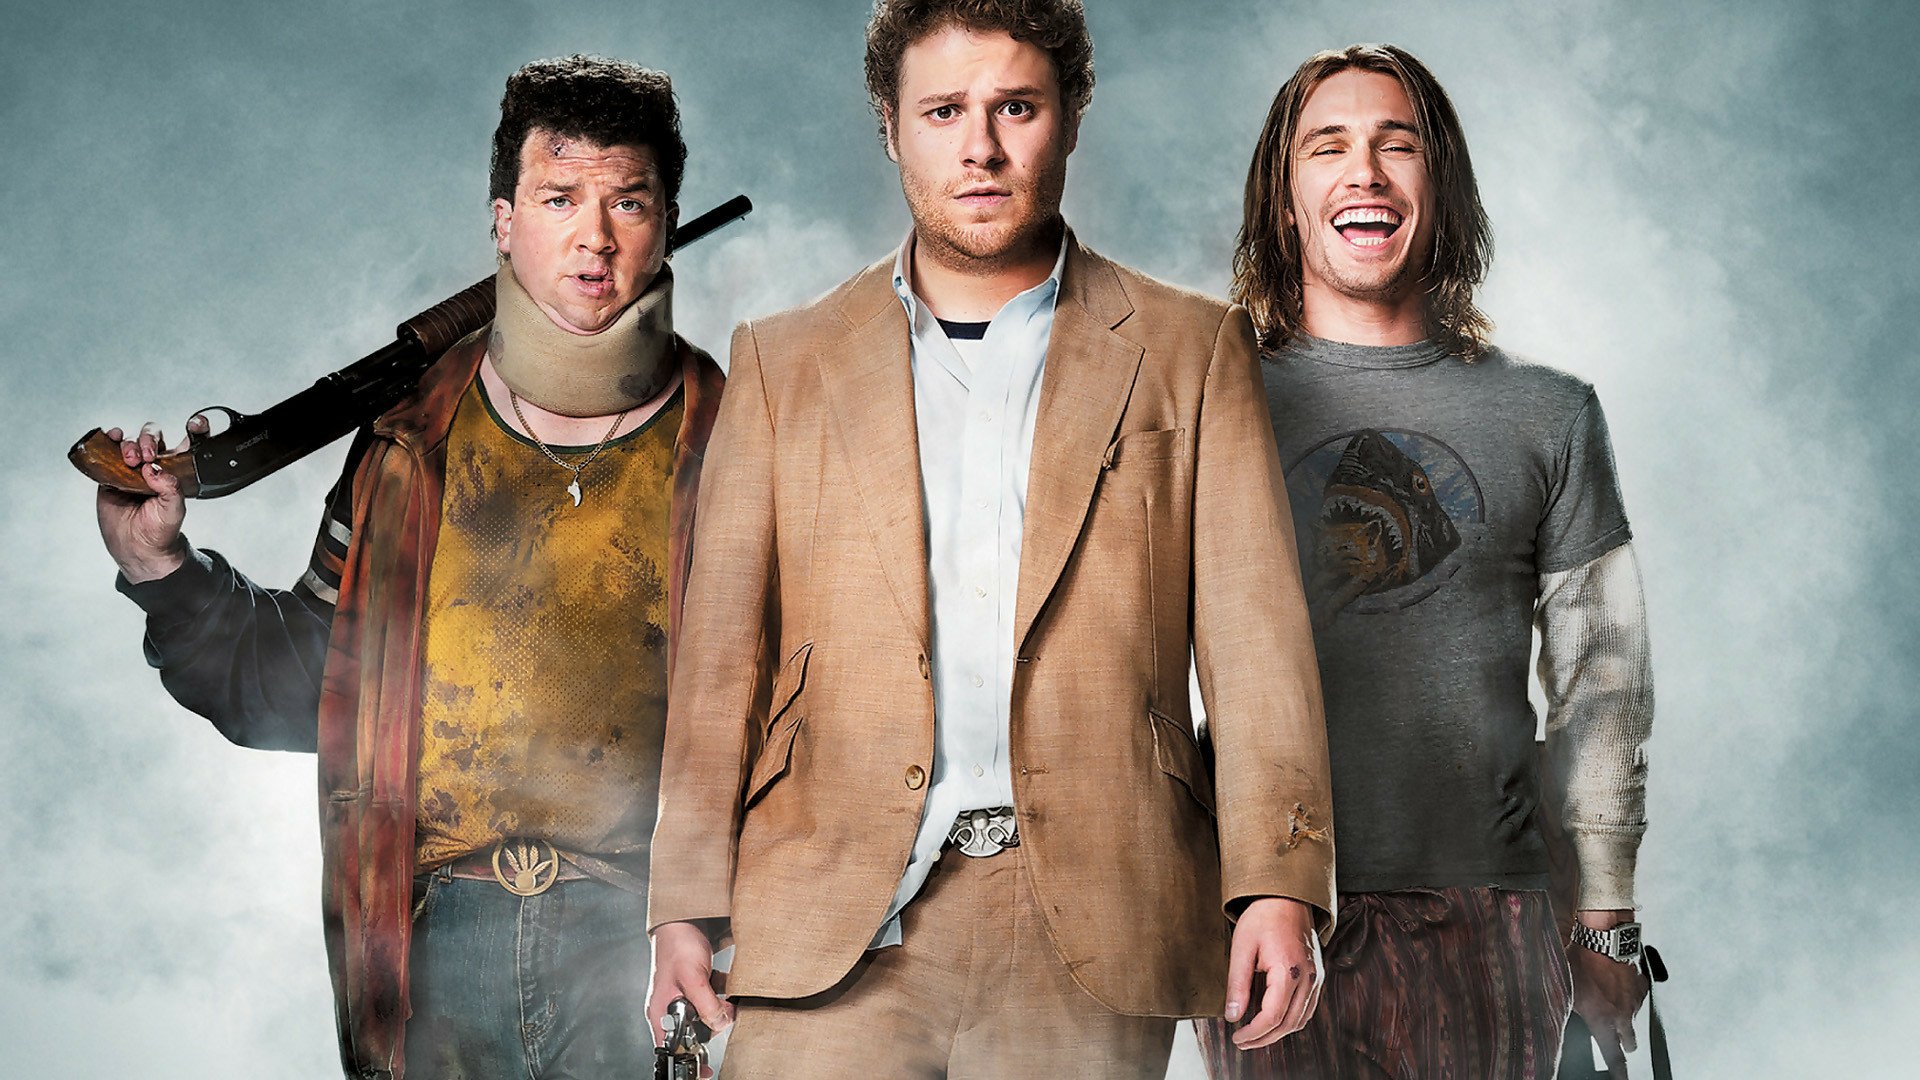 Download Movie Pineapple Express  HD Wallpaper